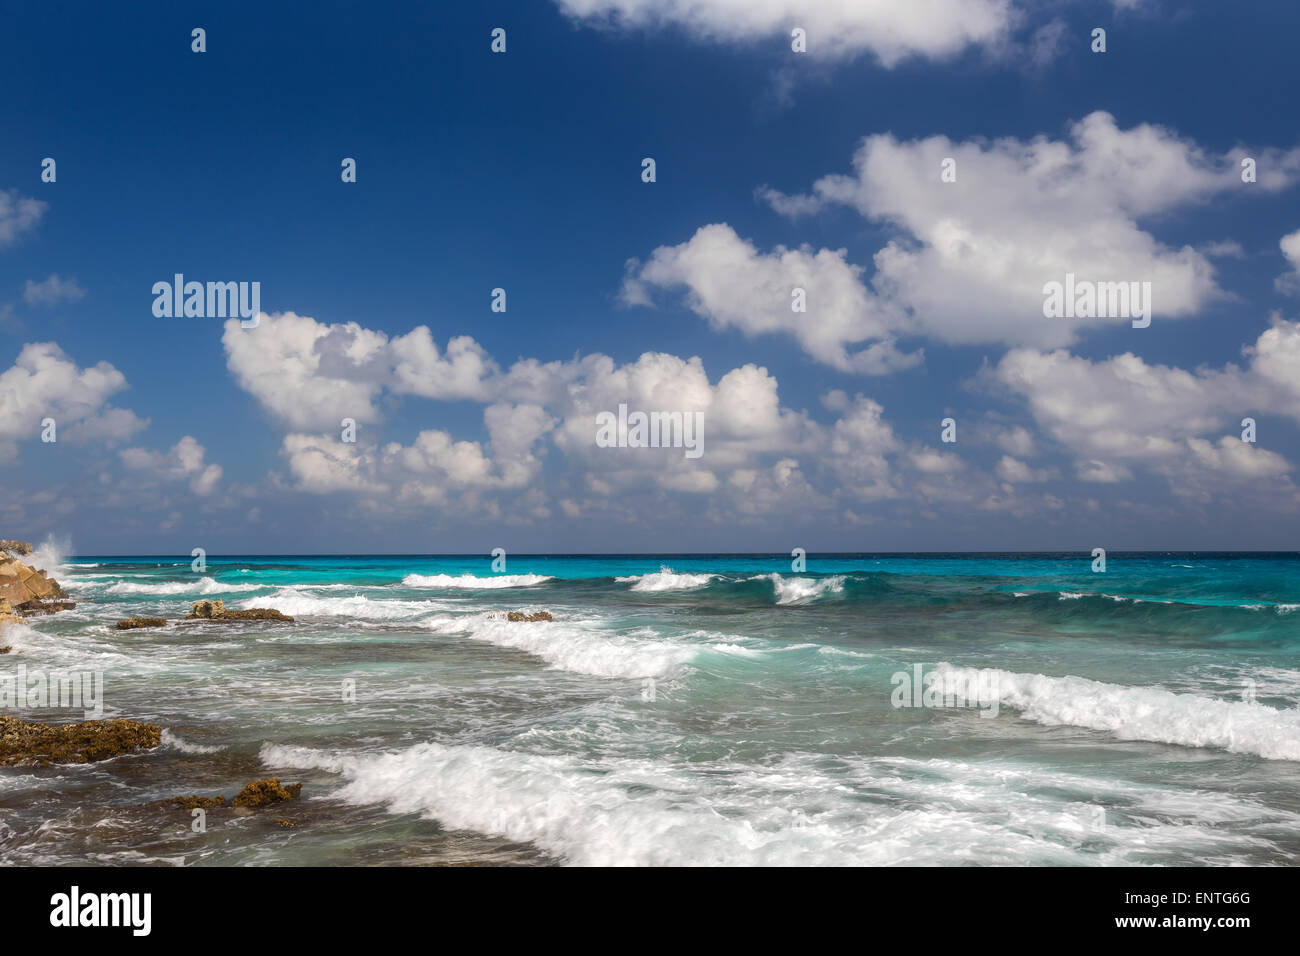 Ocean with waves and rocks on caribbean beach Stock Photo